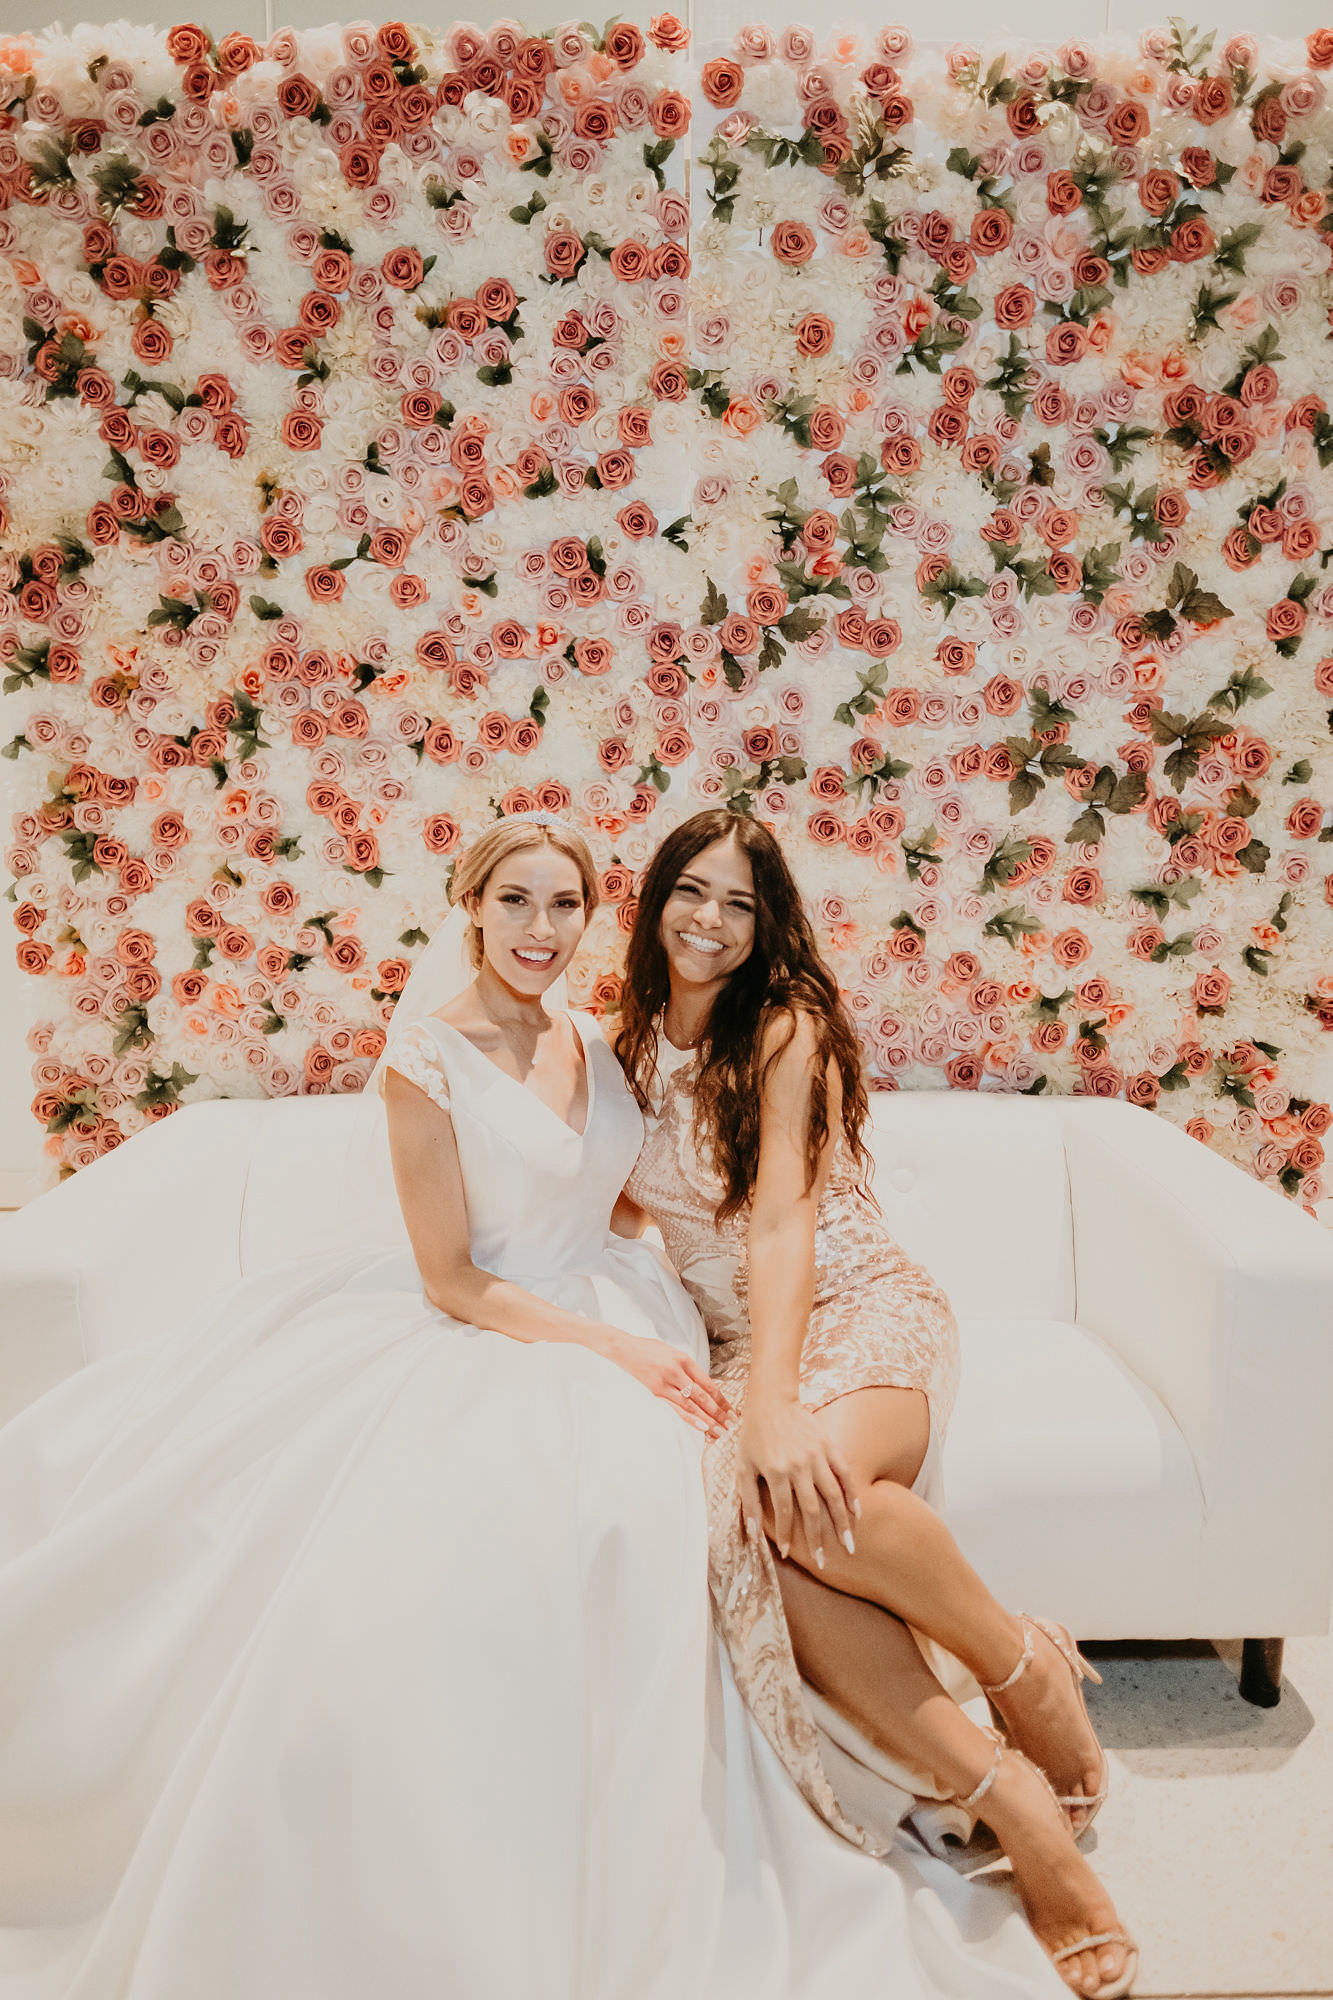 Wedding Floral Flower Wall Backdrop of White and Pink Roses with White Loveseat Photo Op | V Neck Mikado Satin Custom Ballgown Wedding Dress by Anomalie